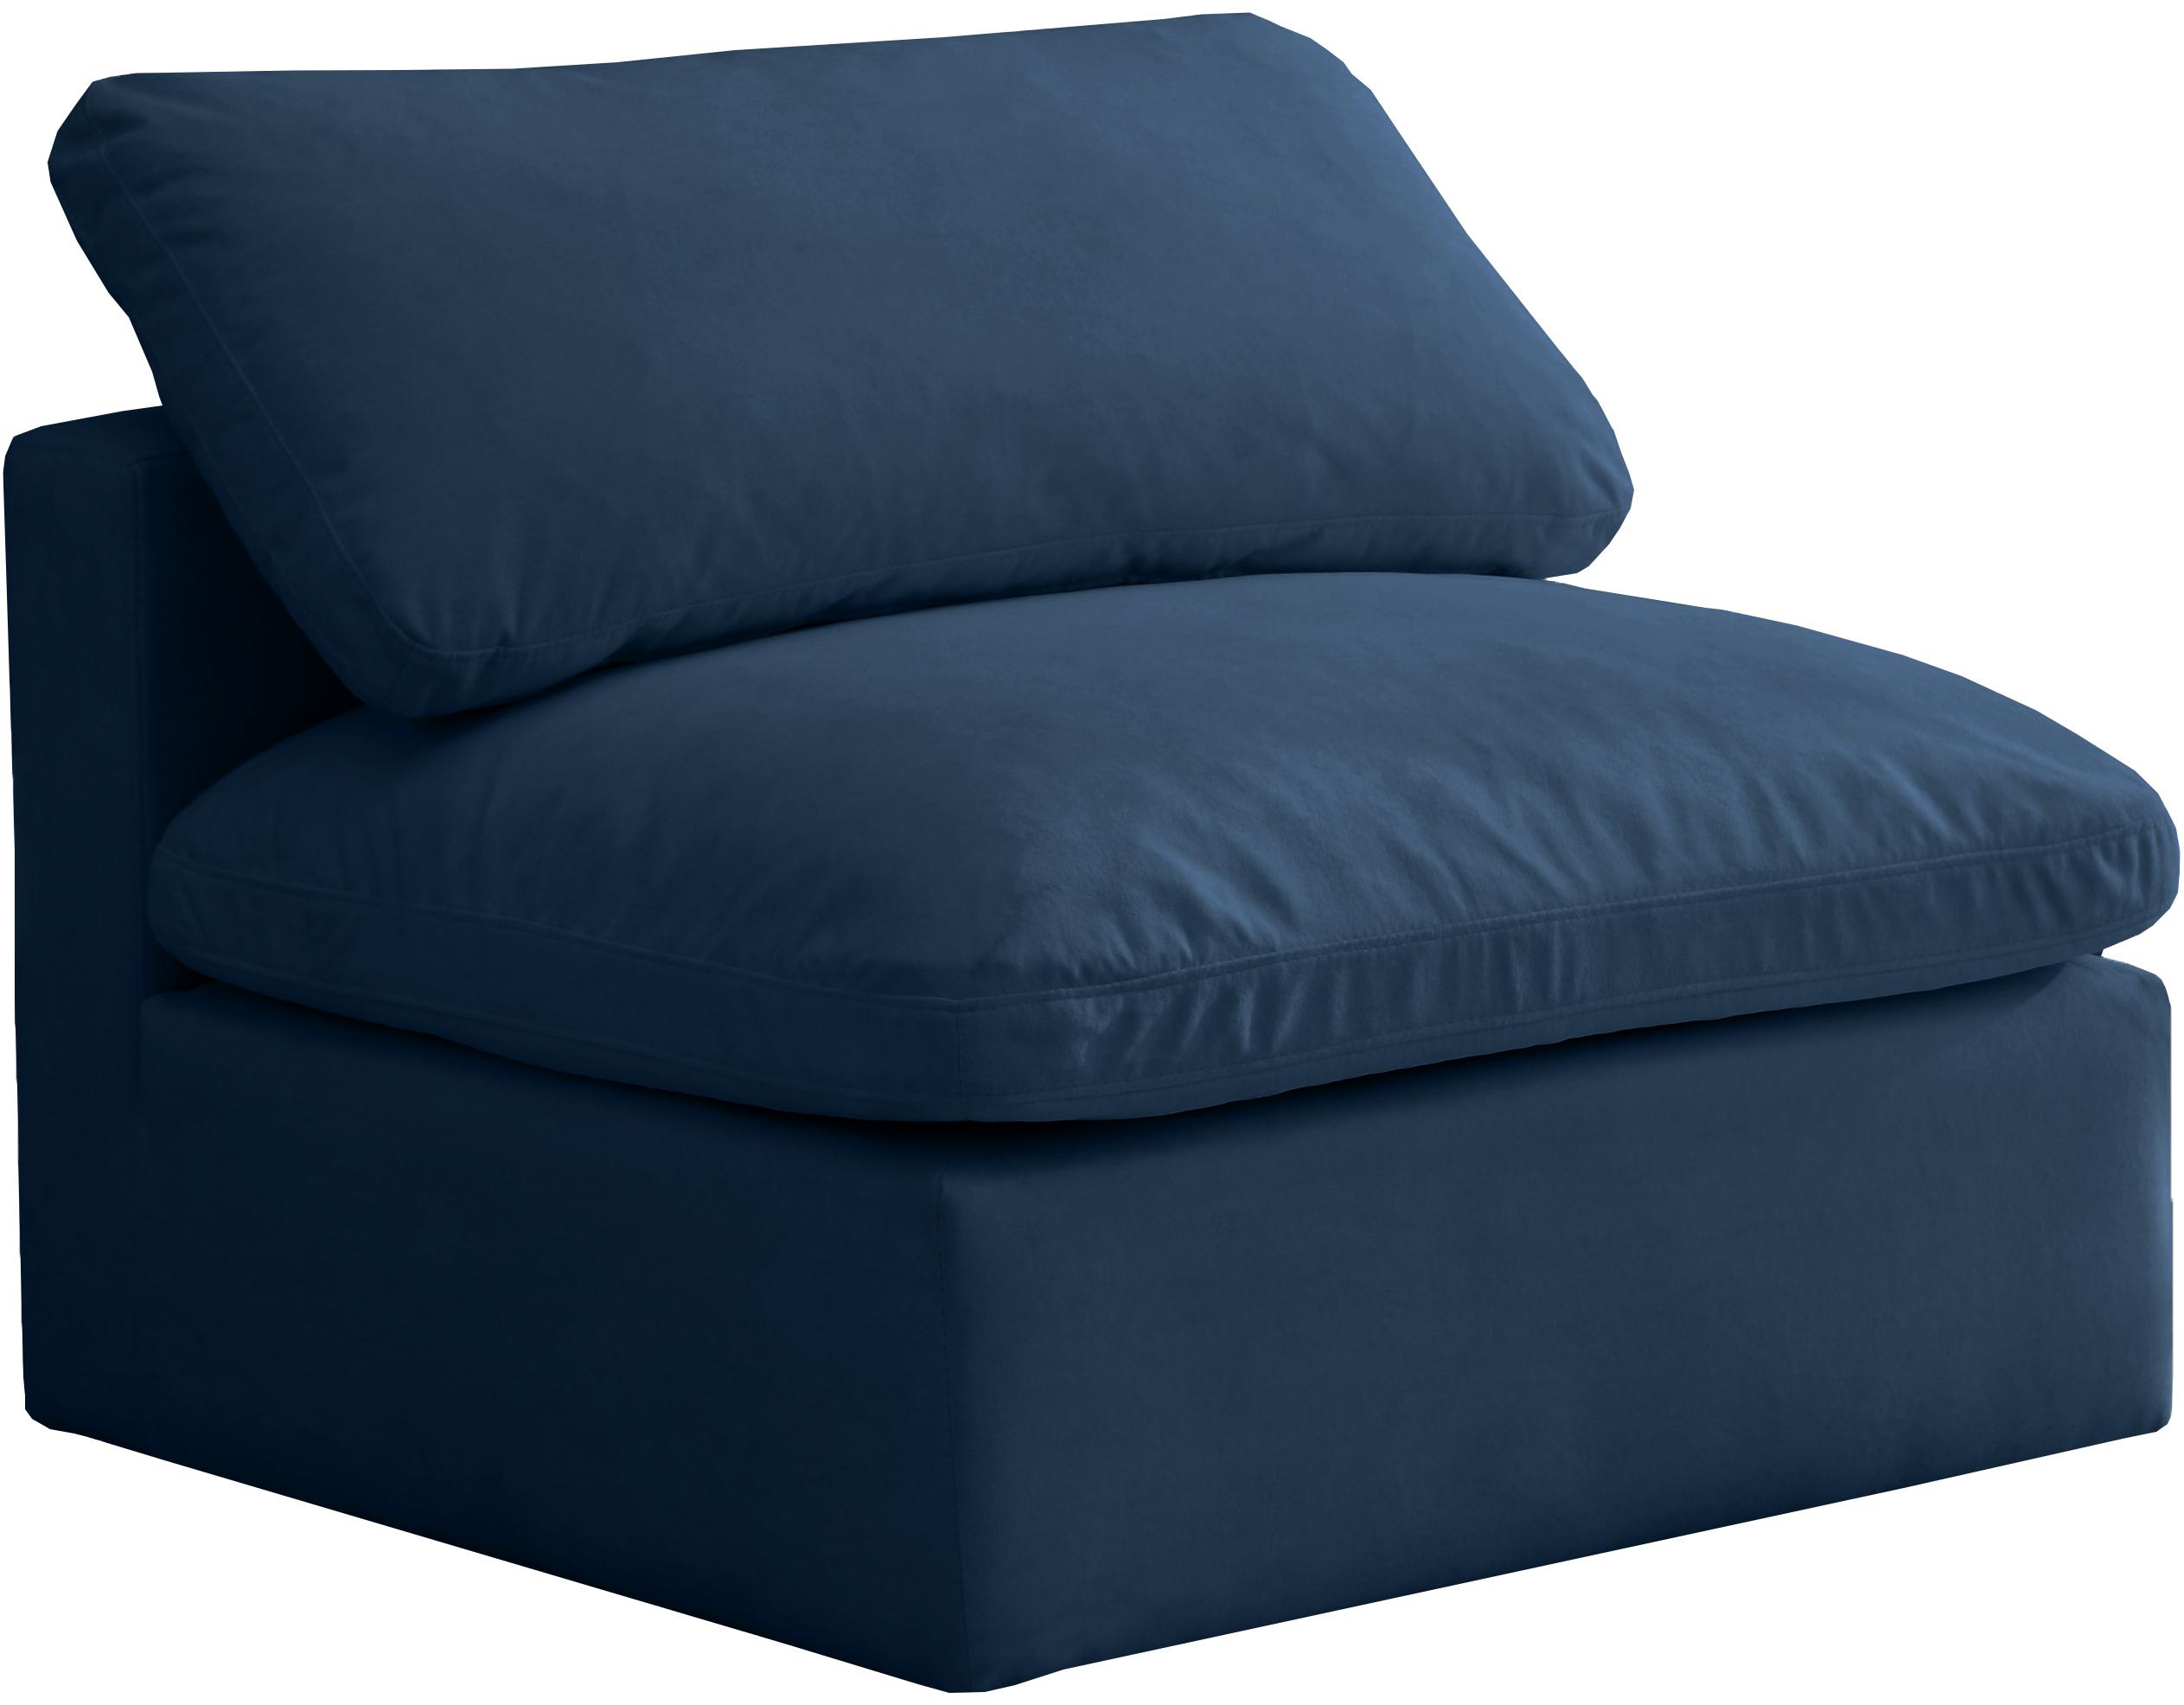 Contemporary, Modern Oversized Chair Cloud NAVY NAVY-Chair-Cloud in Navy Fabric